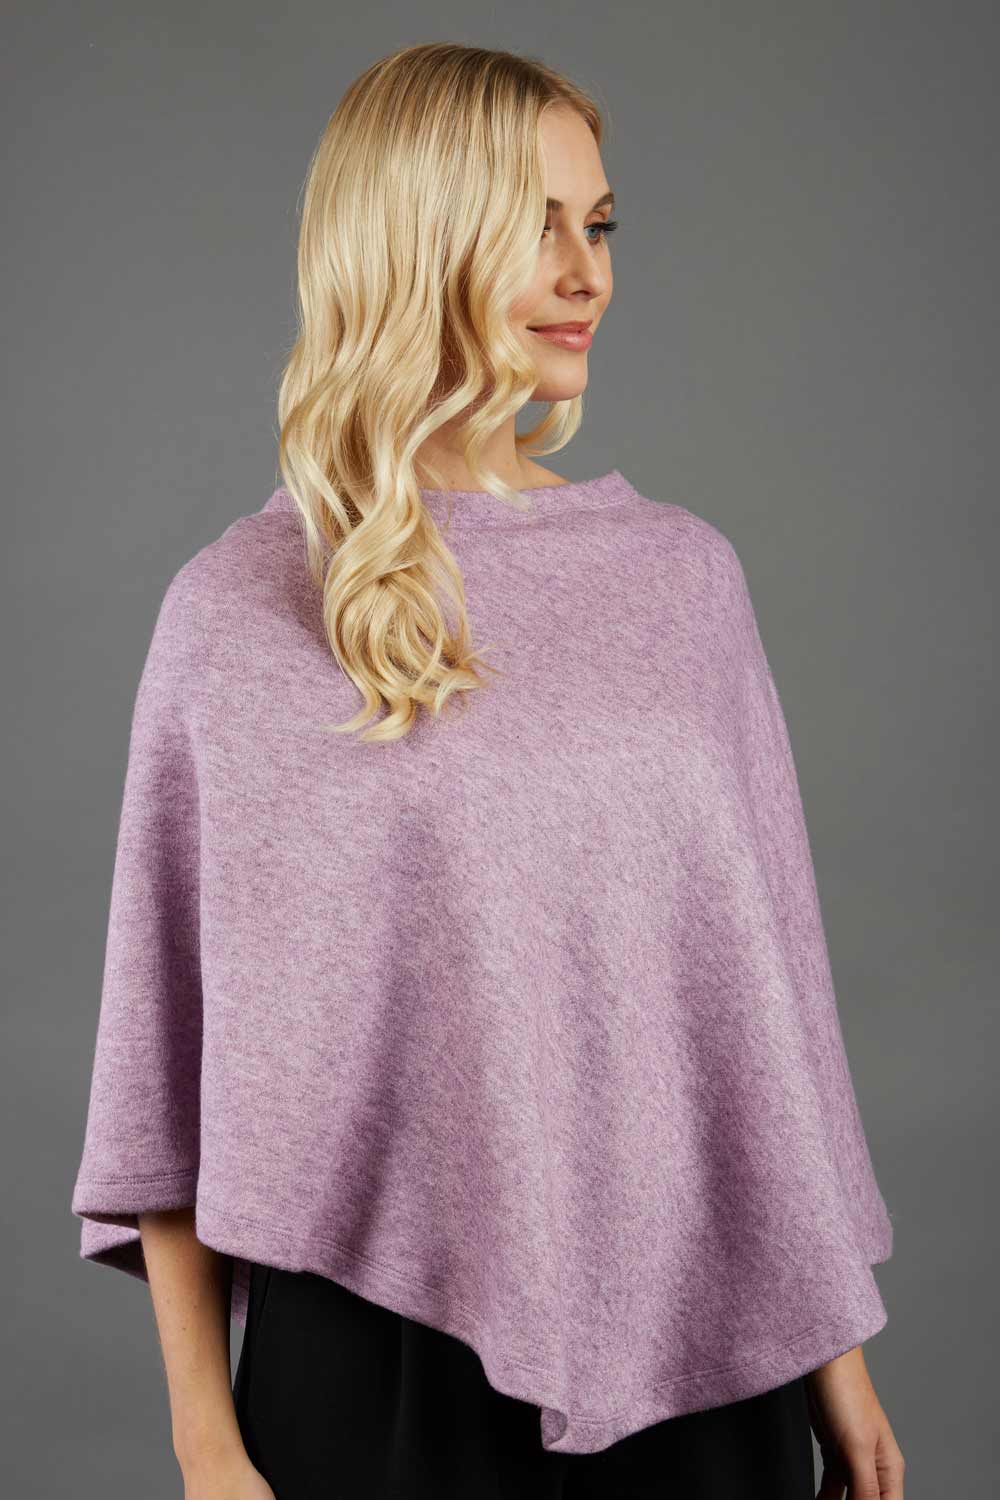 blonde model wearing diva catwalk rosalia poncho made in very cosy soft cashmere fabric in pale pink front